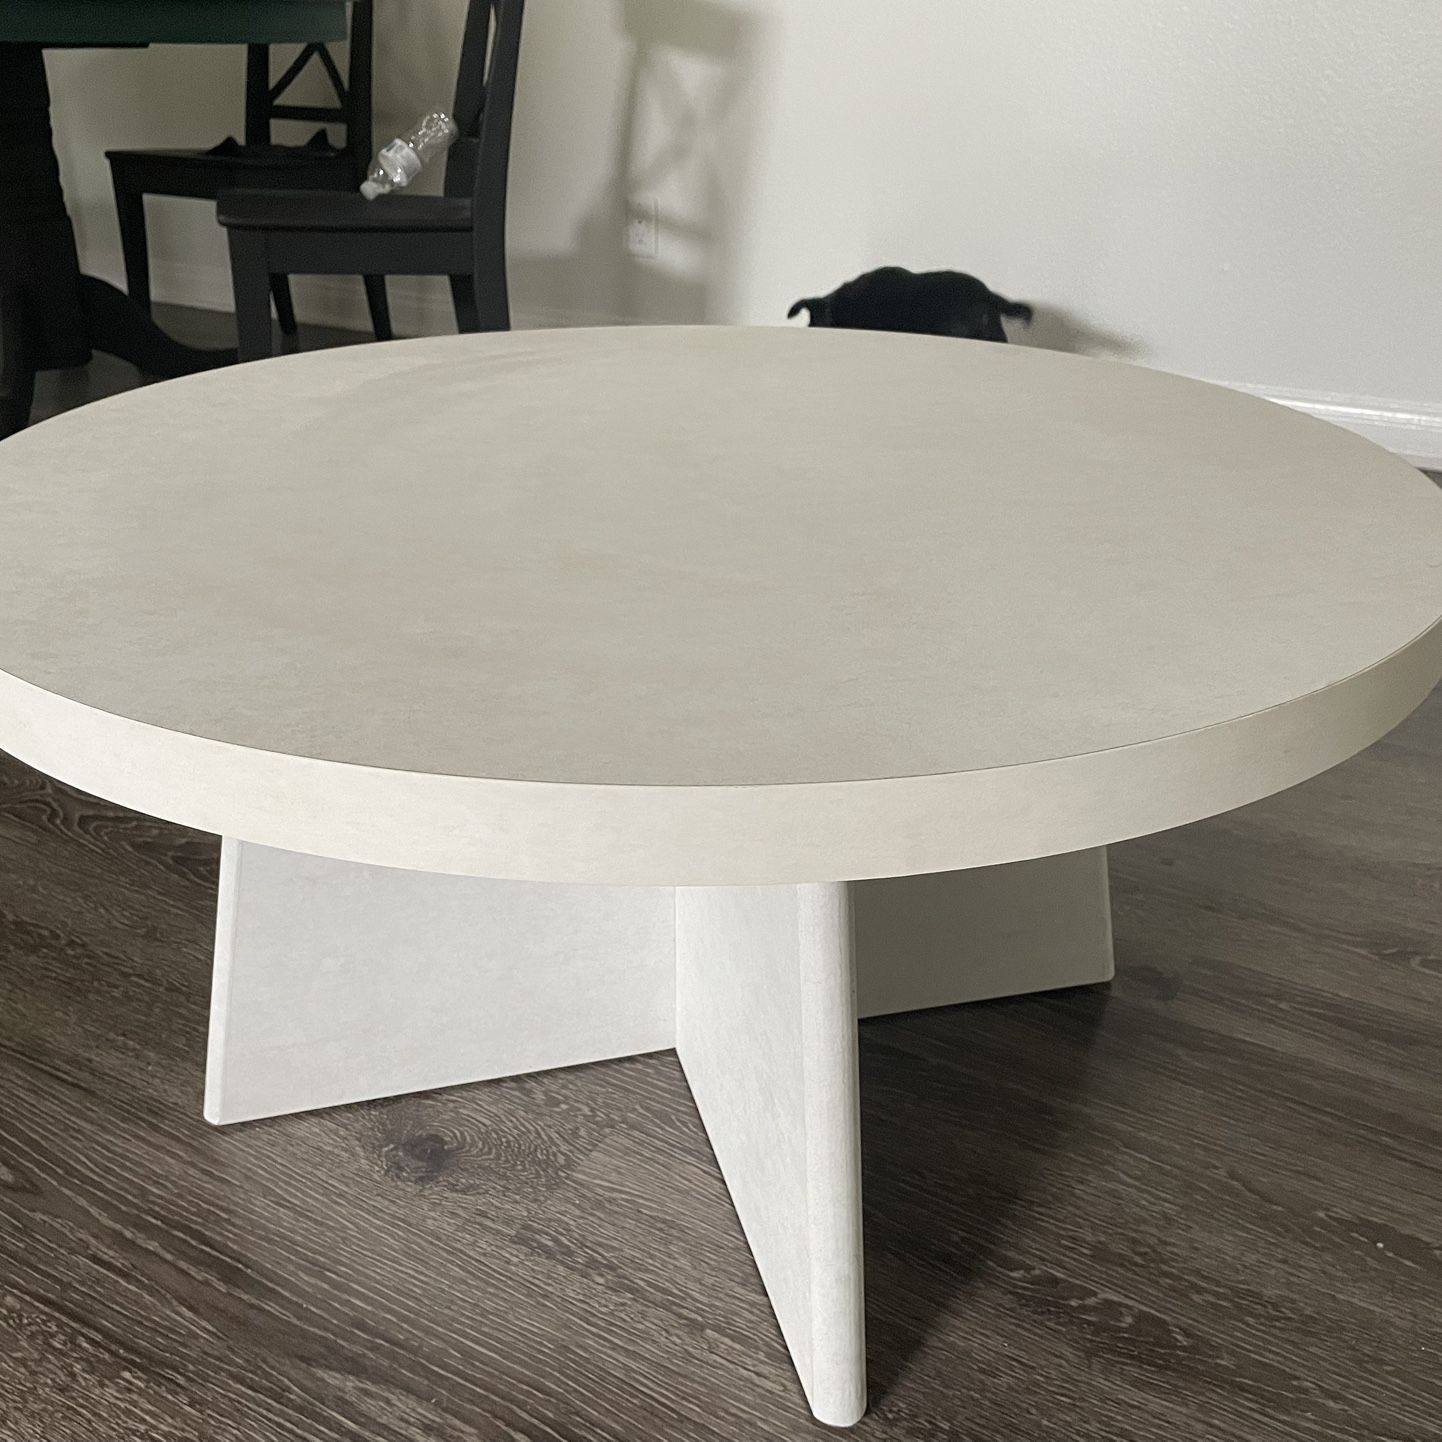 Queer Eye Liam Round Coffee Table For Sale In Huntington Beach, Ca – Offerup Intended For Liam Round Plaster Coffee Tables (View 8 of 15)